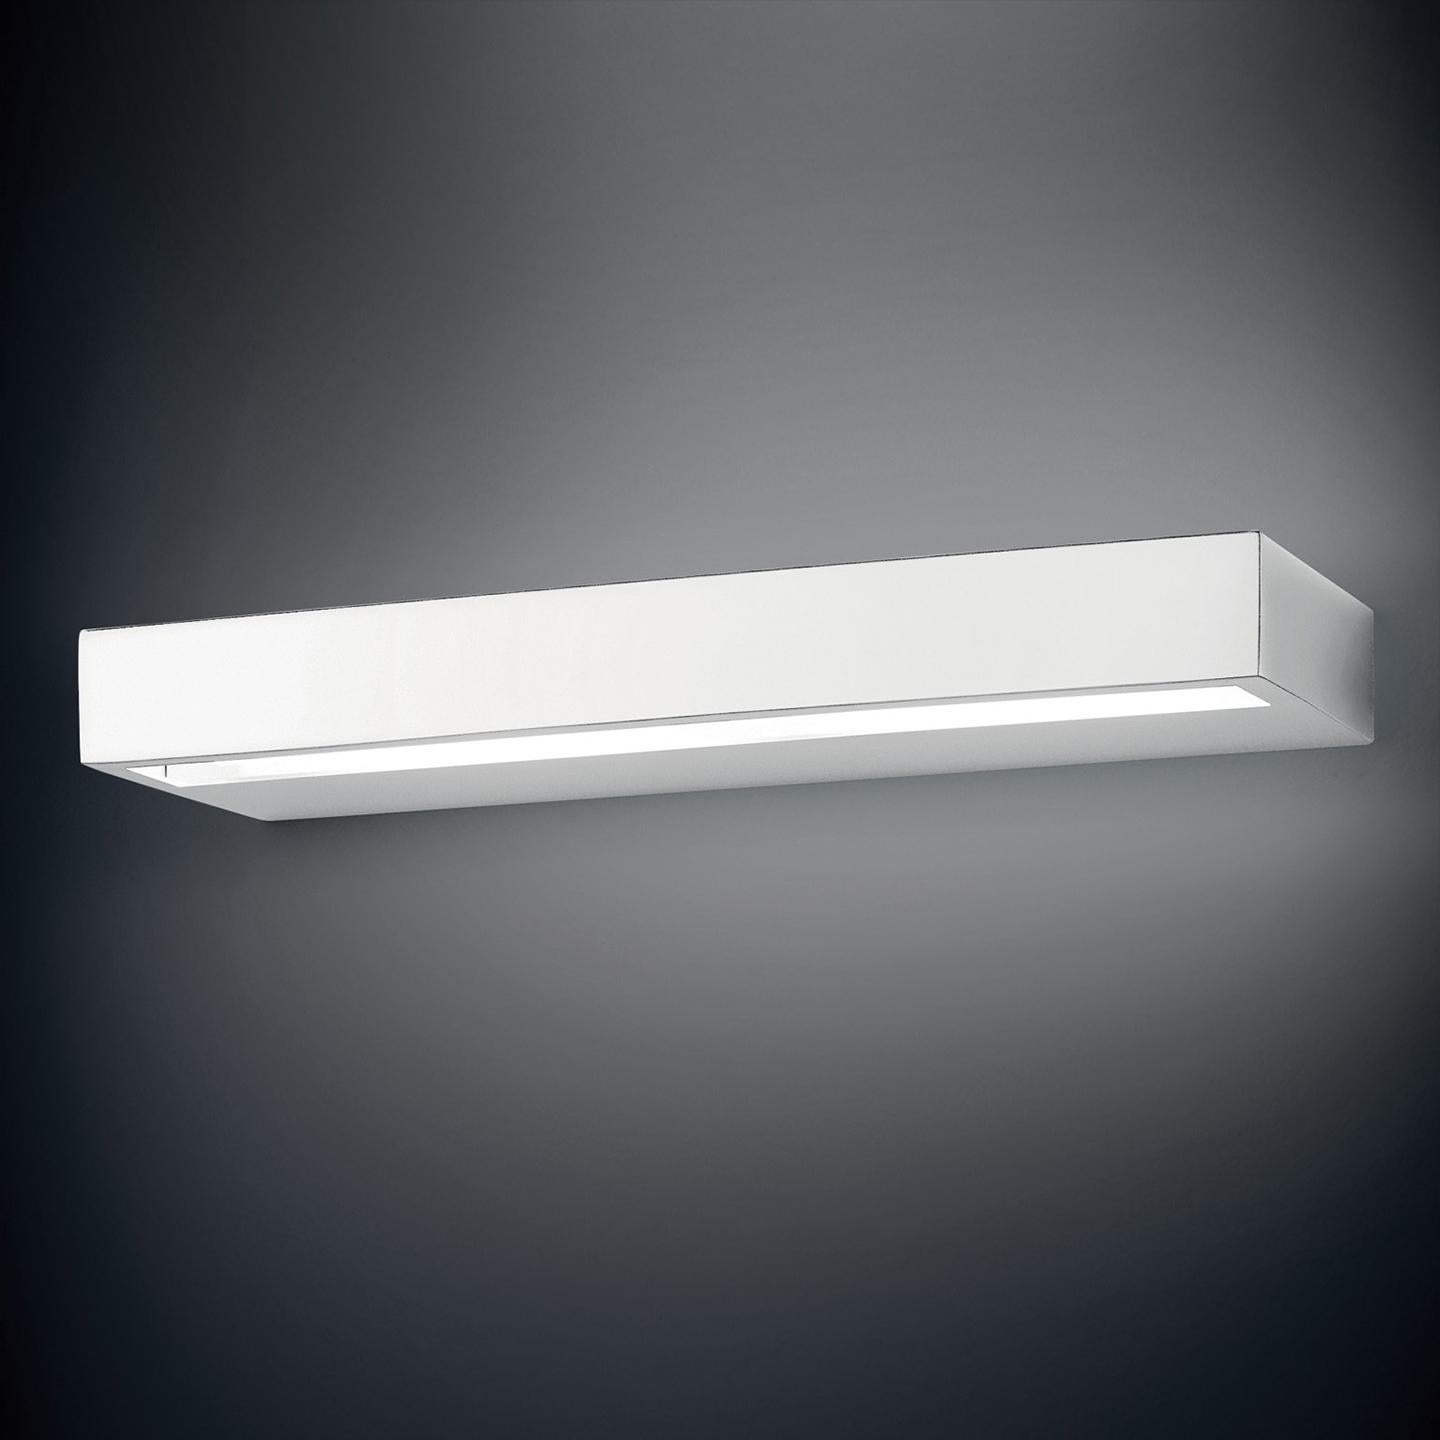 Designed in 2004 by Design Works Studio (Tonetto and Lazzati), Alias wall lamp is a beautiful, minimal piece with clean lines. Its sleek design and integrated LED light source is perfect for a wide array of projects. Available in brushed nickel,